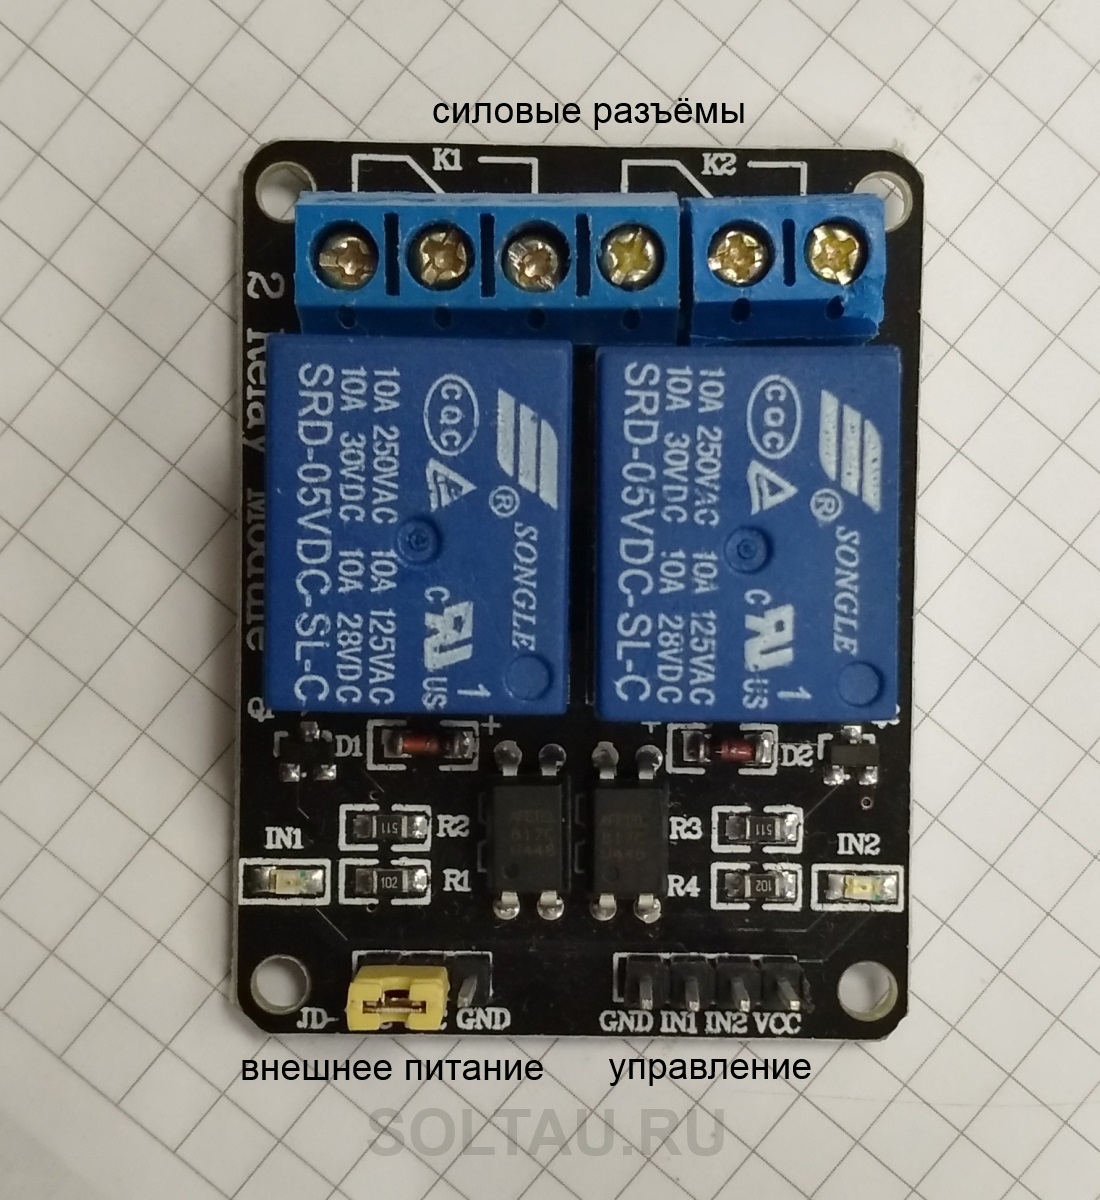 Connecting the relay control module to the Arduino board